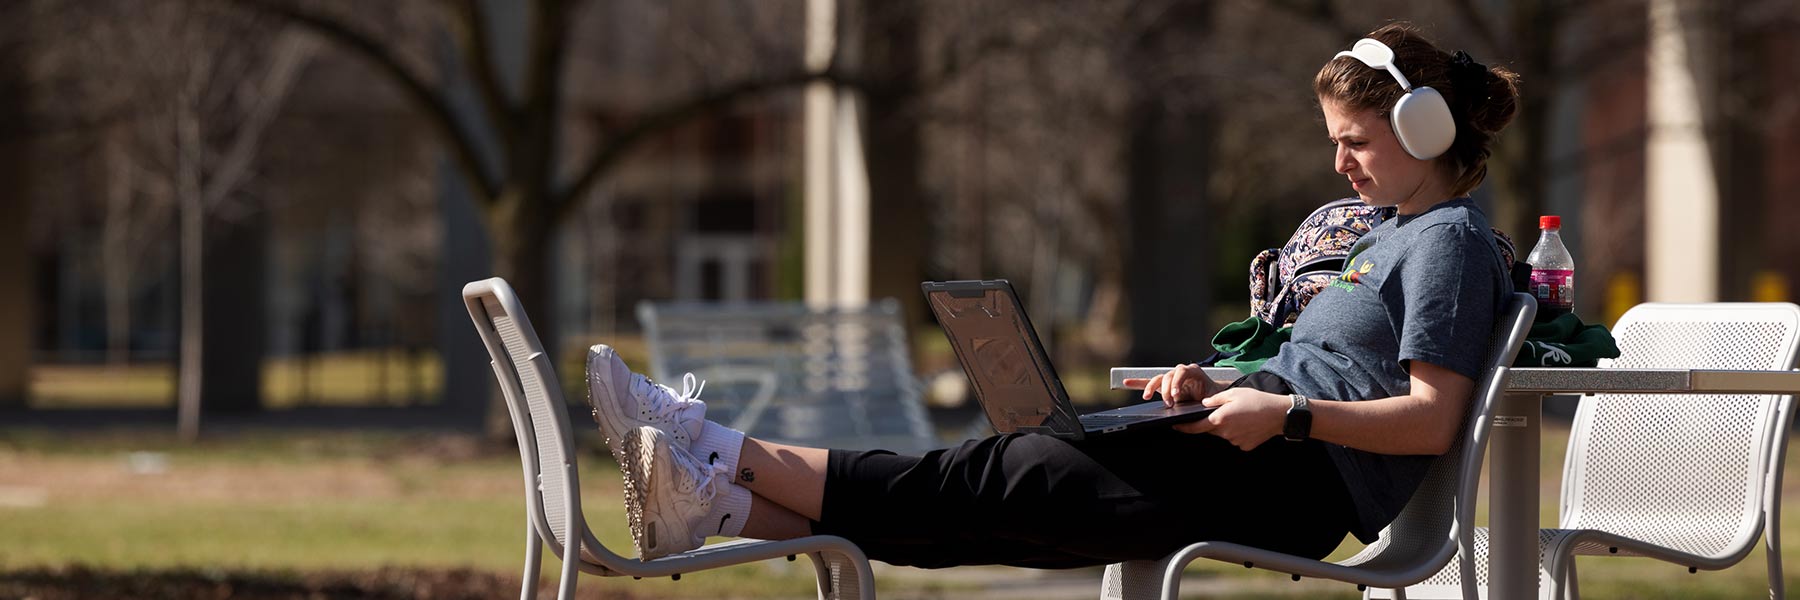 A student studies with a laptop on her lap and headphone on while sitting with her legs up on an outdoor table and chairs